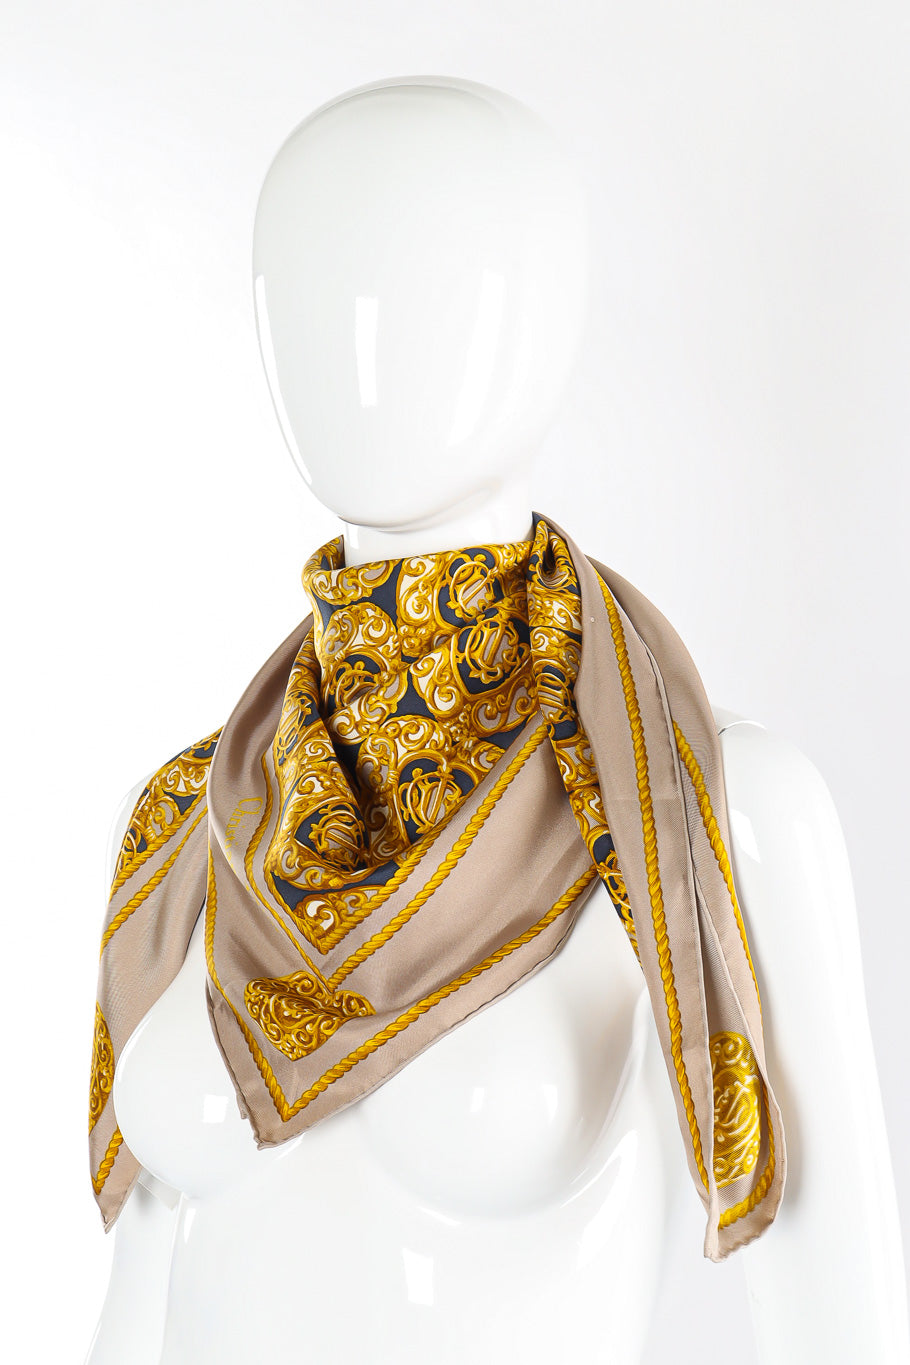 Brocade heart print scarf by Christian Dior side view photo on mannequin @recessla